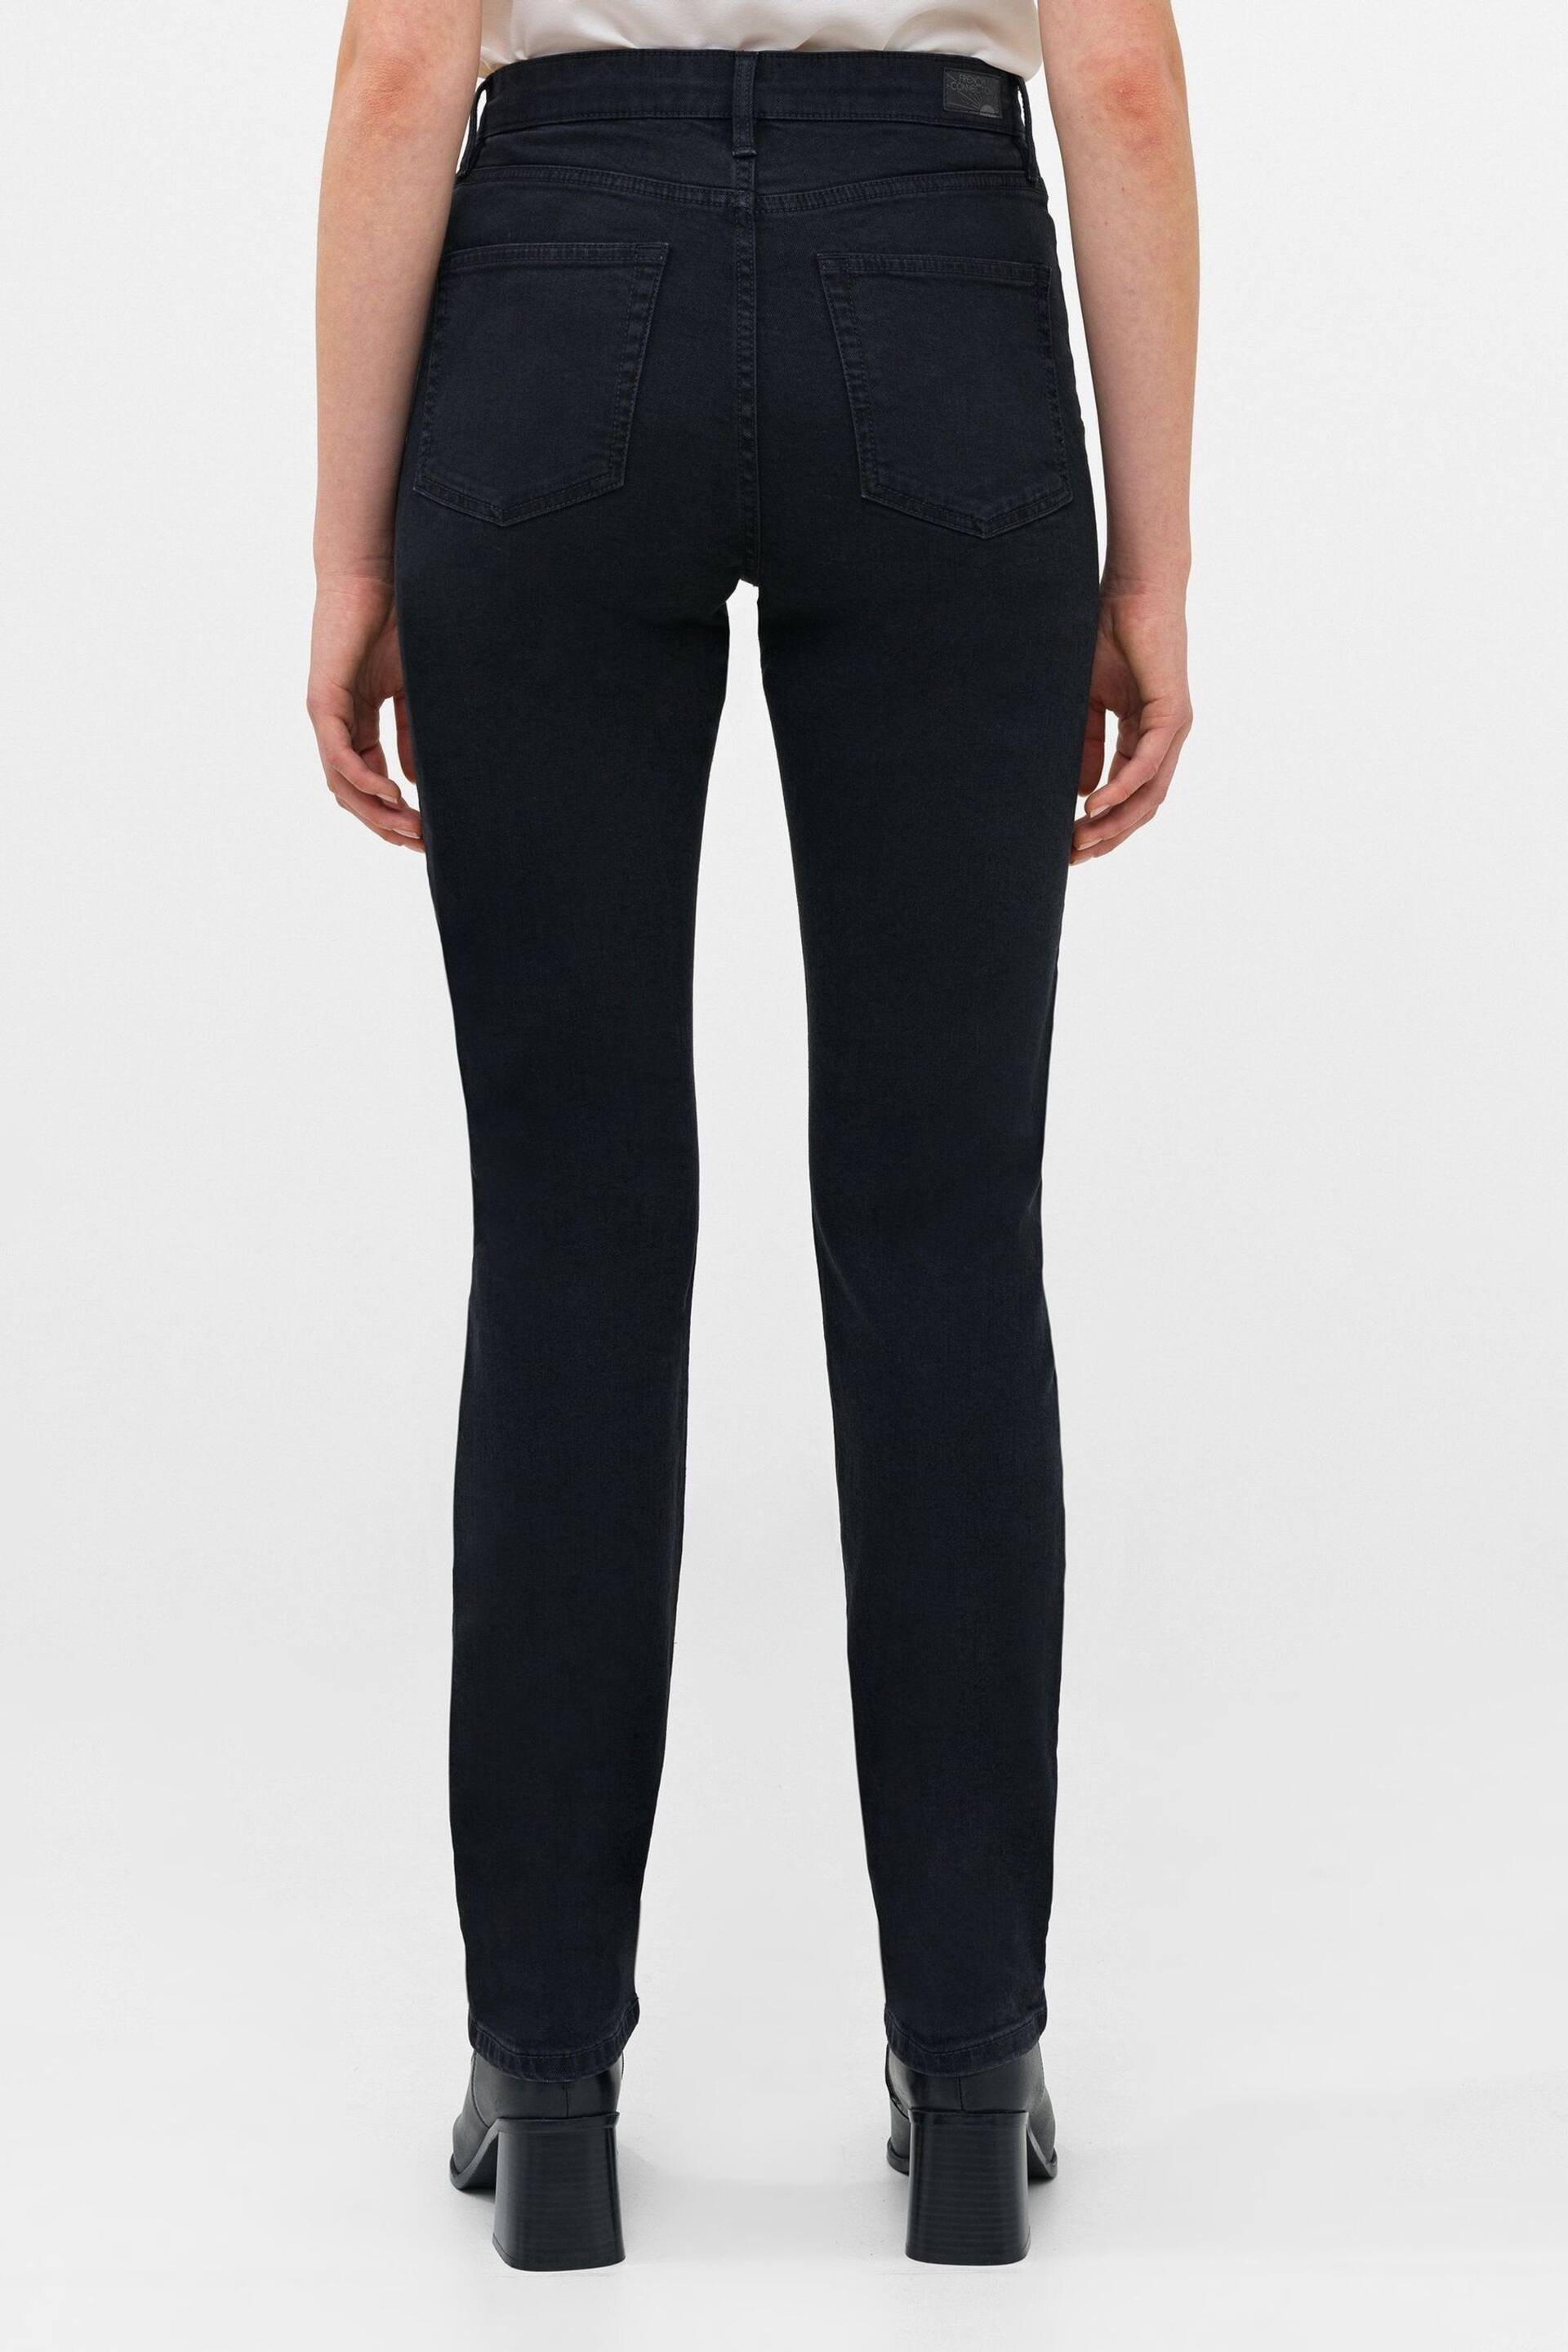 French Connection Stretch Cigarette Full Trousers - Image 2 of 4